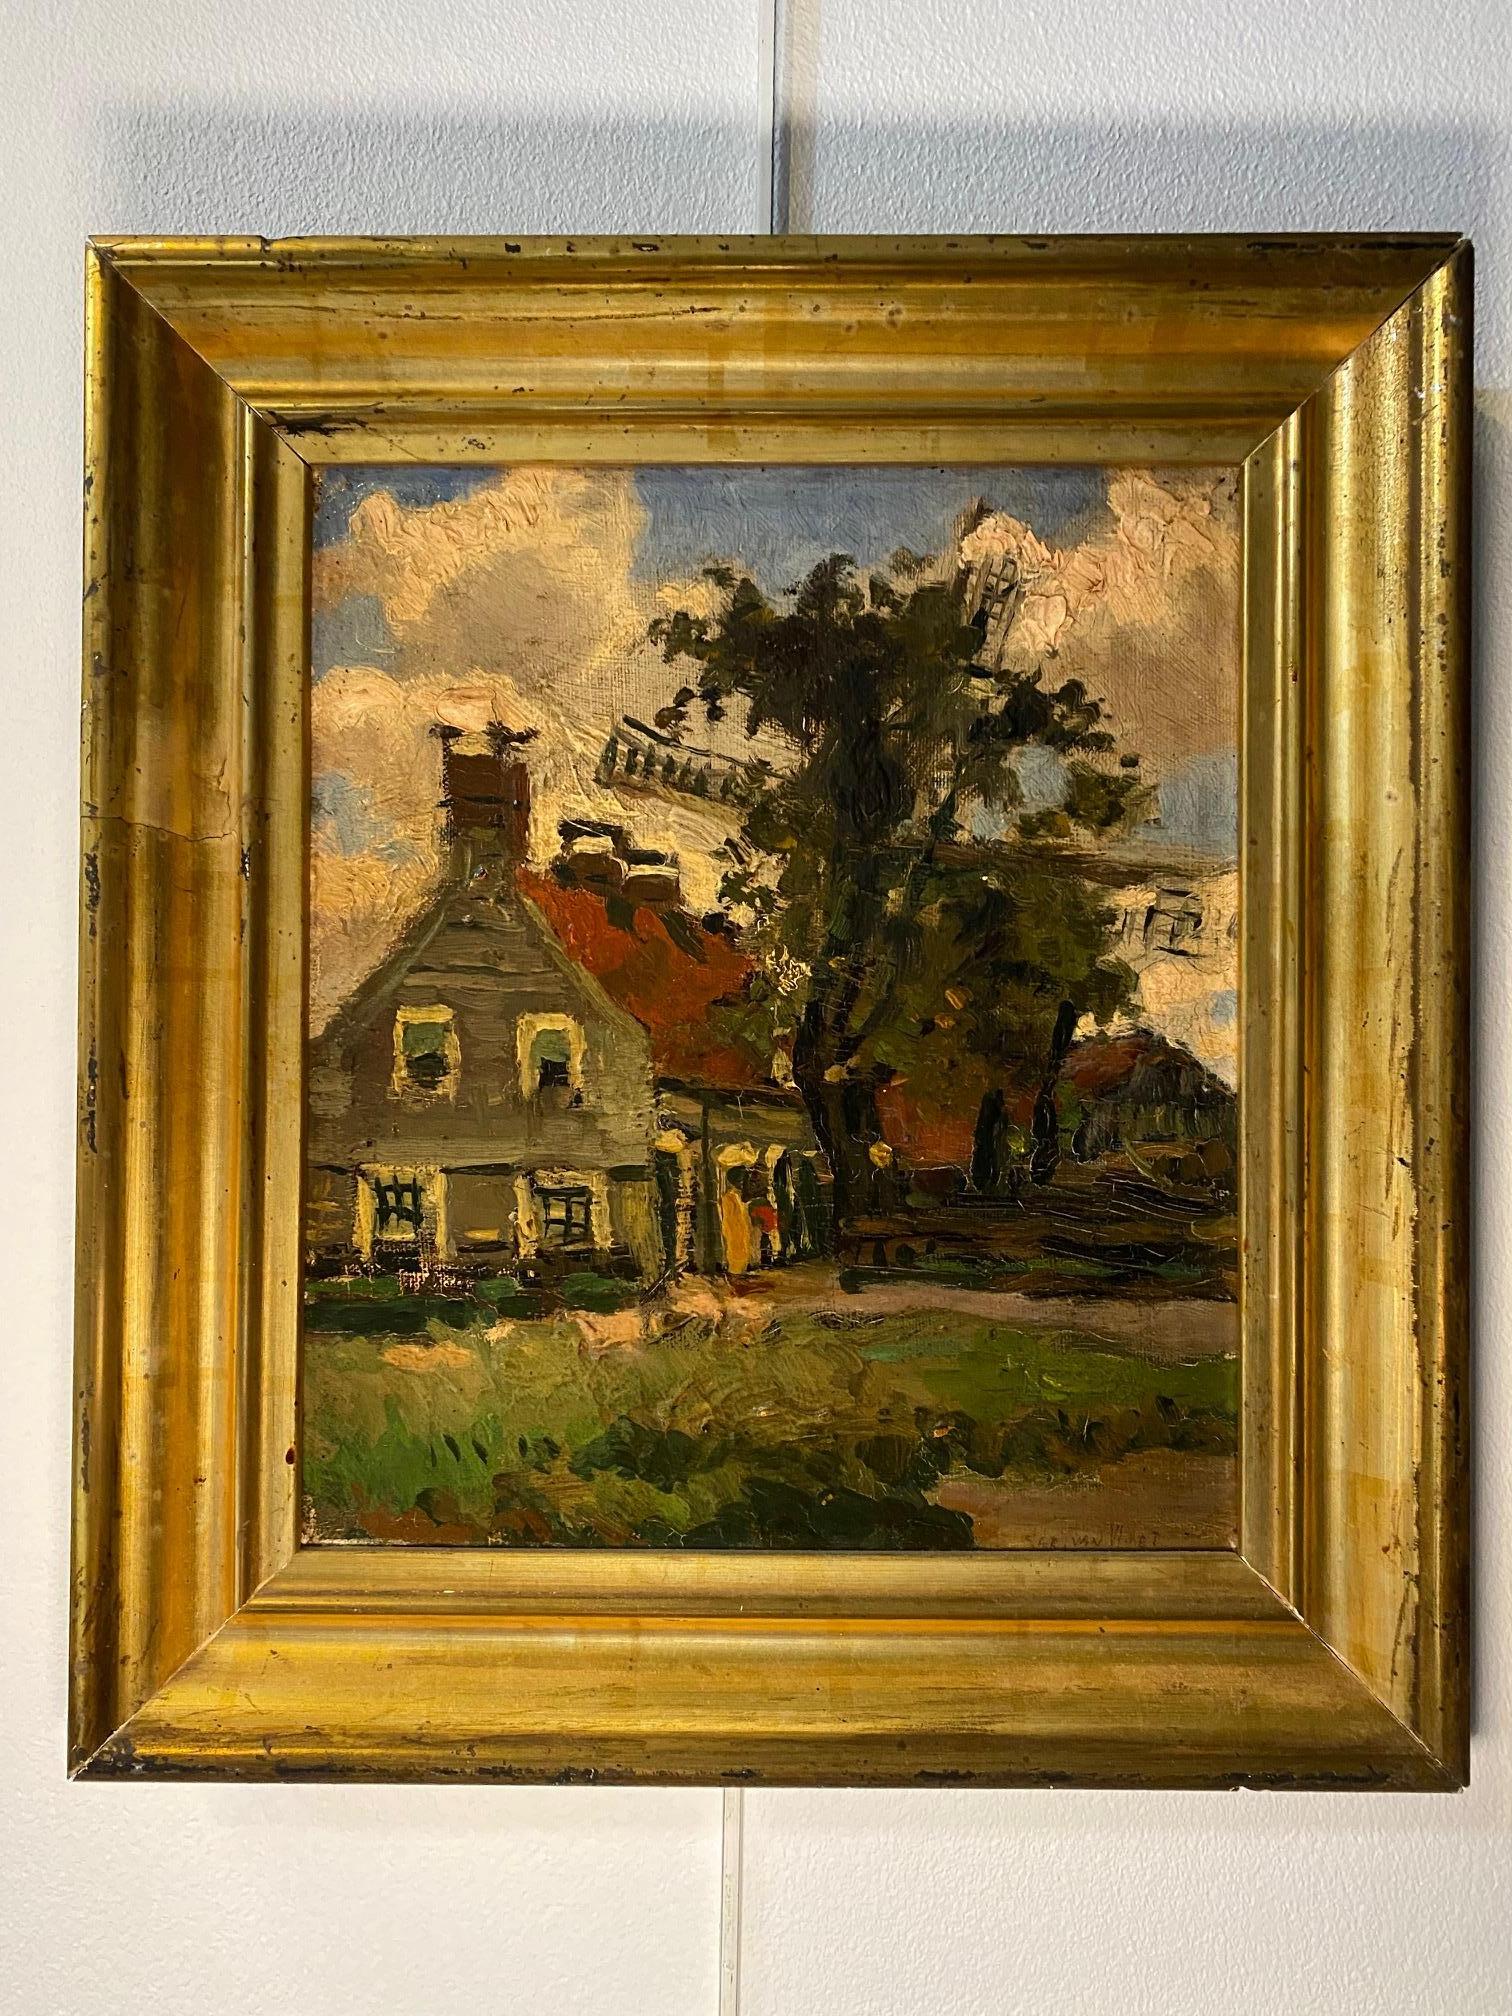 Oil on wood sold with frame 
Total size with frame 30x33 cm

Gérard Van Vliet (1880-1972) is a Dutch architectural designer. And painter in Amsterdam. Dutch School of the 20th century. The Amsterdam Municipal Museum preserves his 